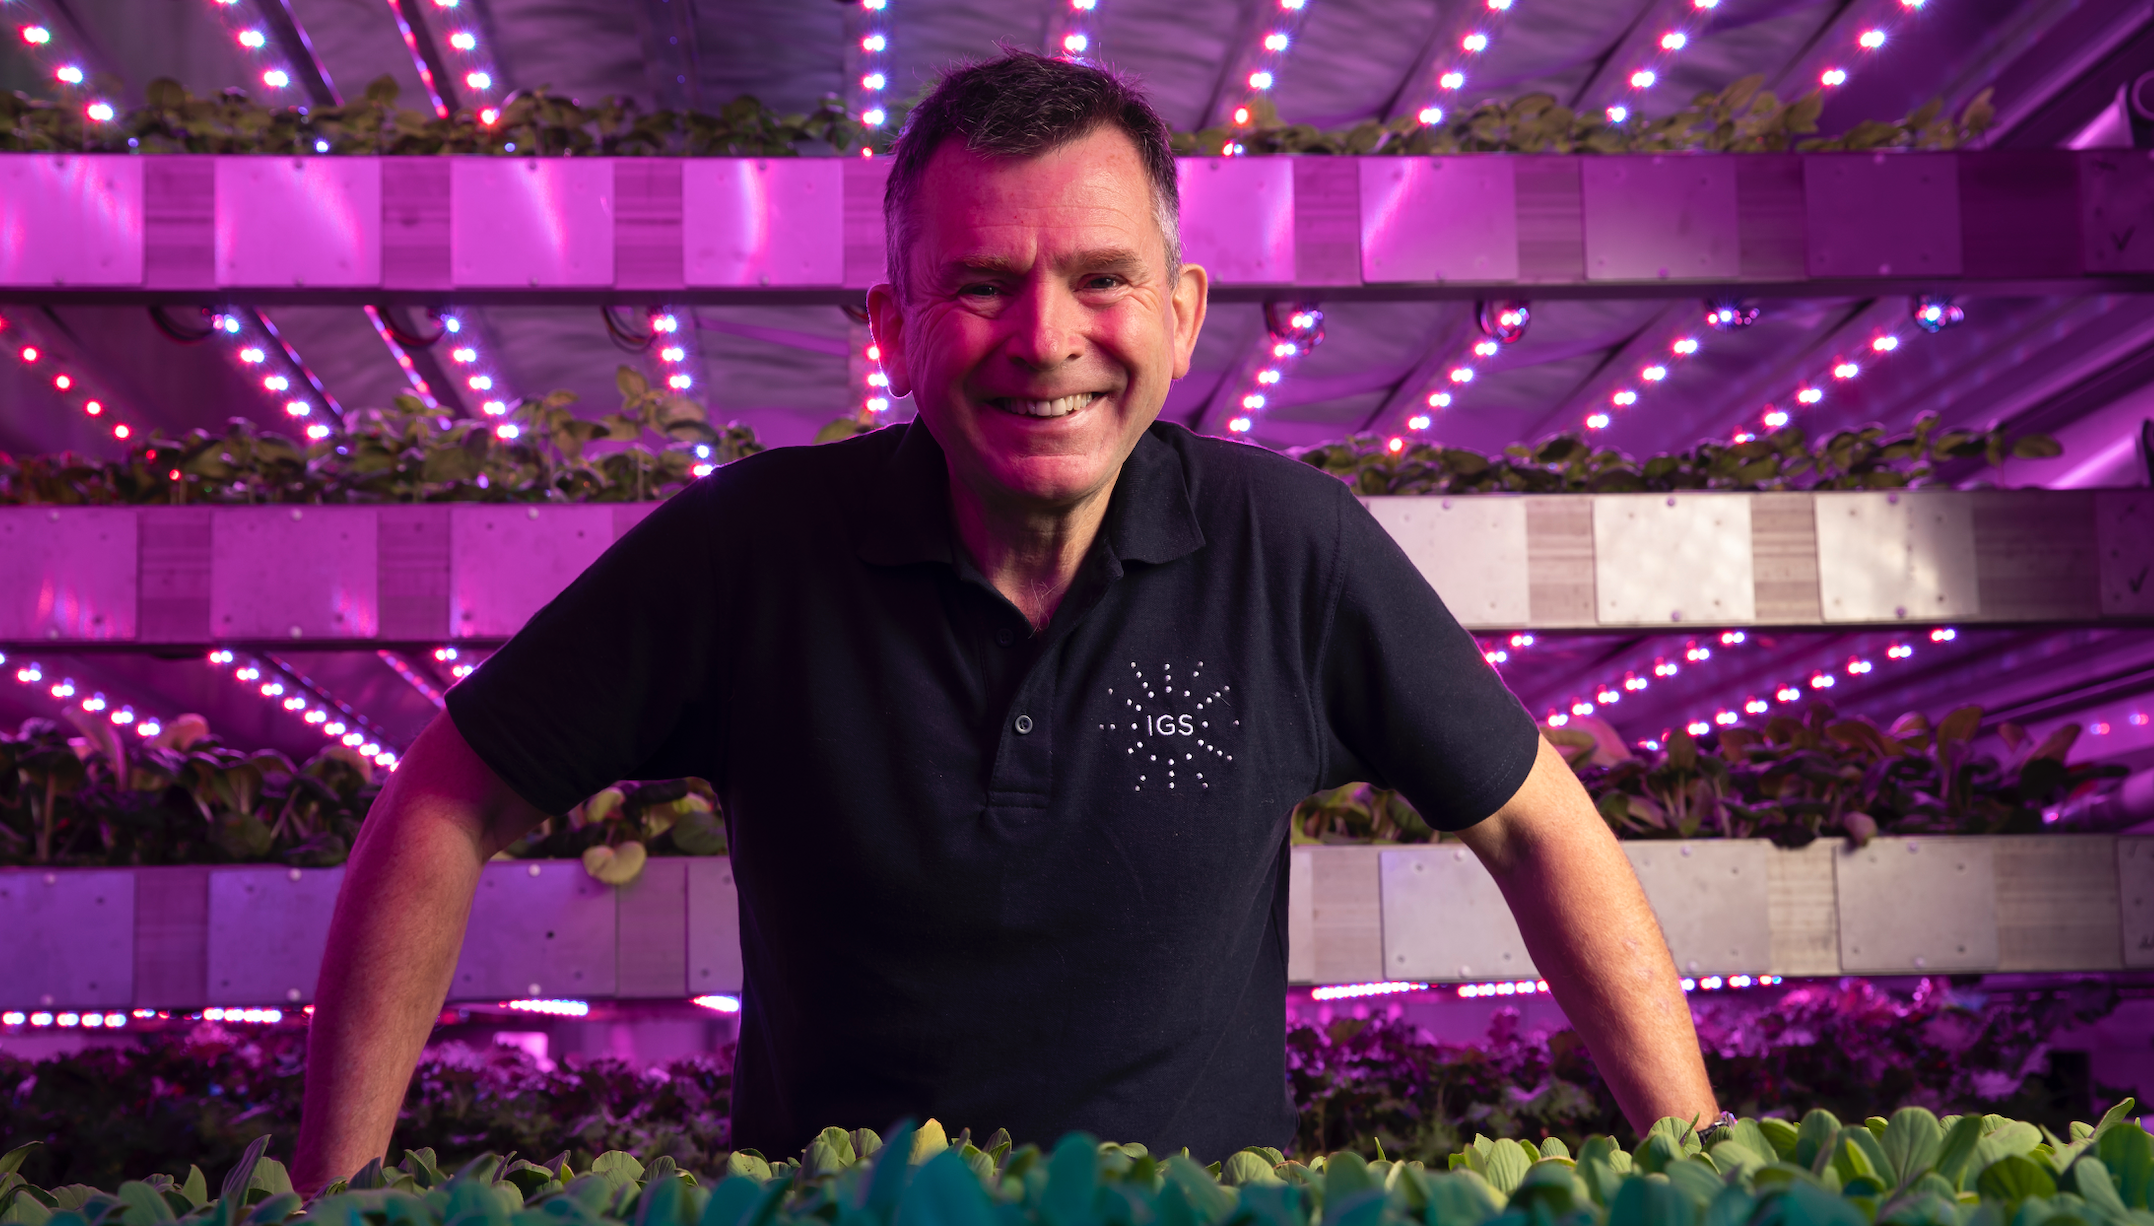 A solution from the future: vertical farming with Intelligent Growth Solutions